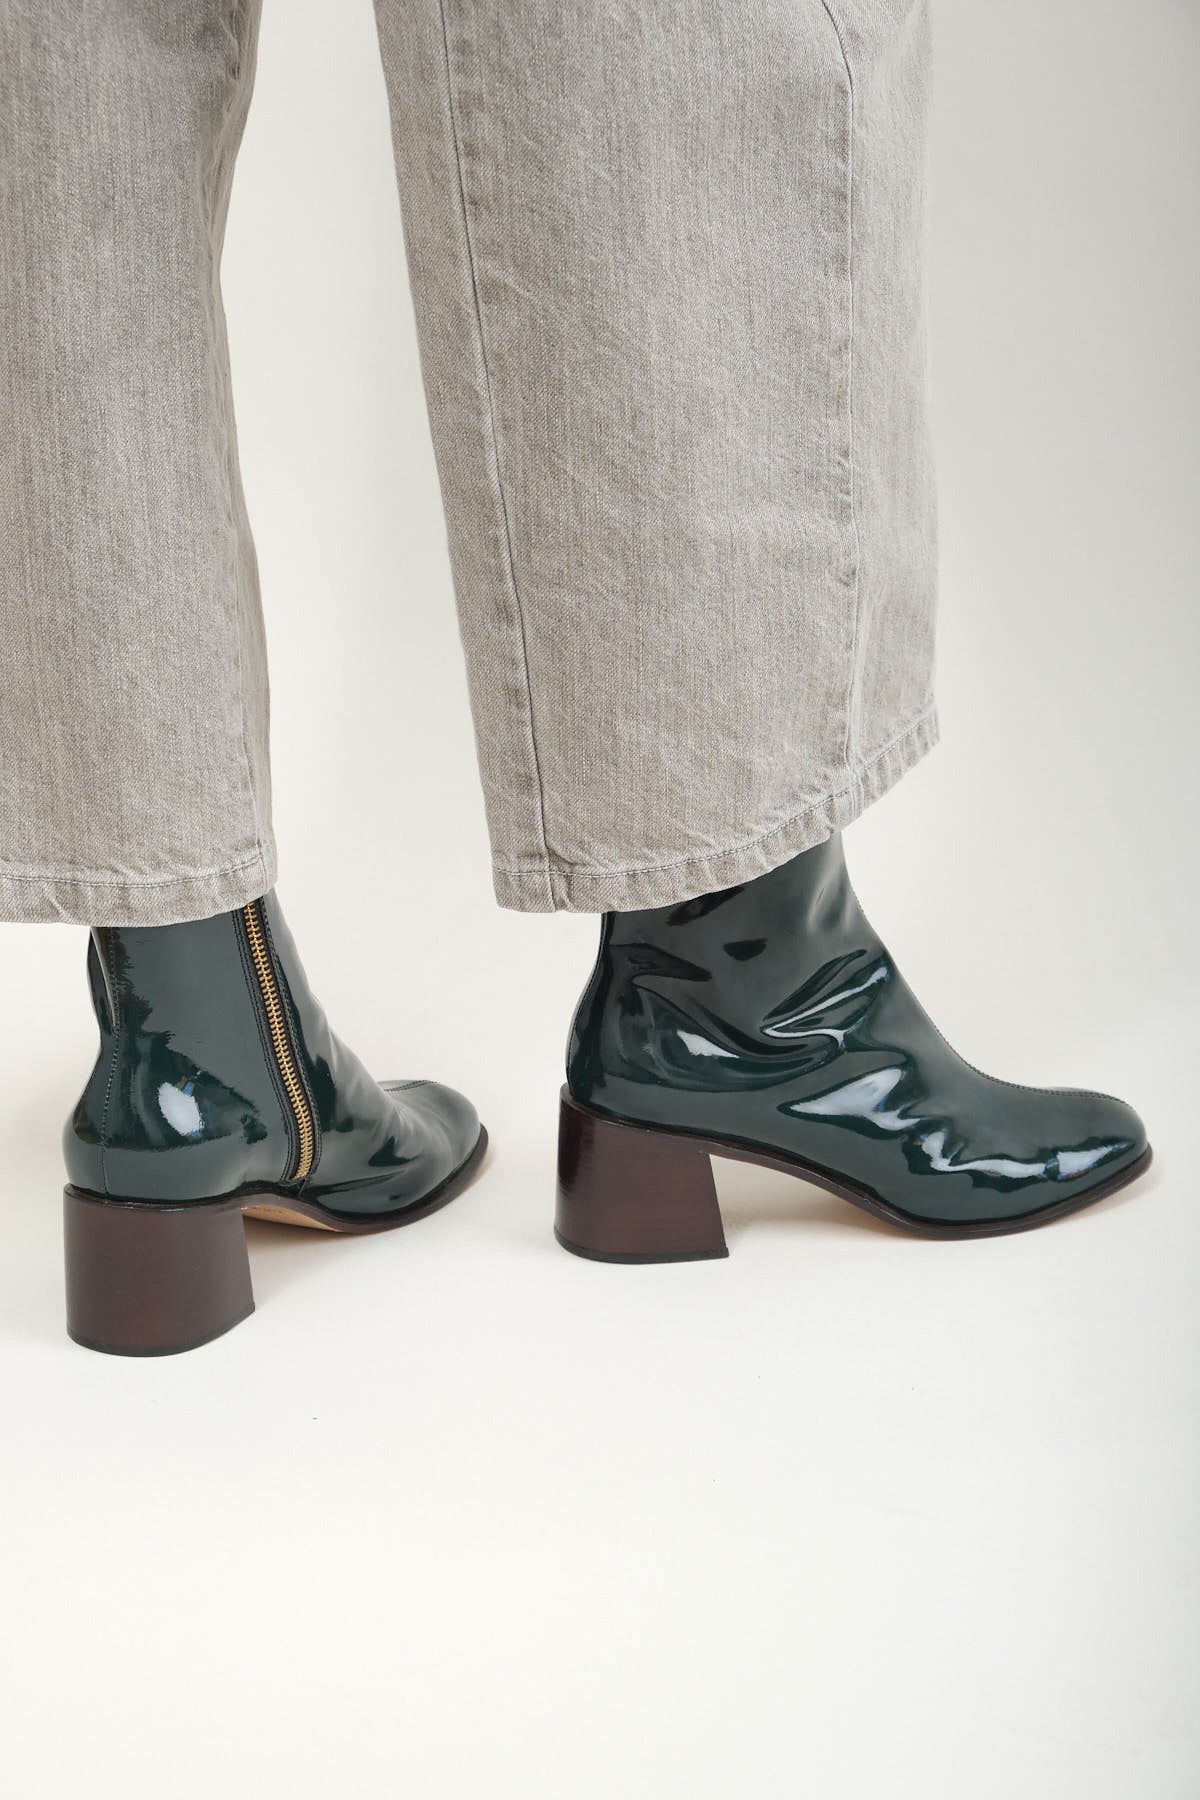 Rachel Comey Leather Boot in Pine